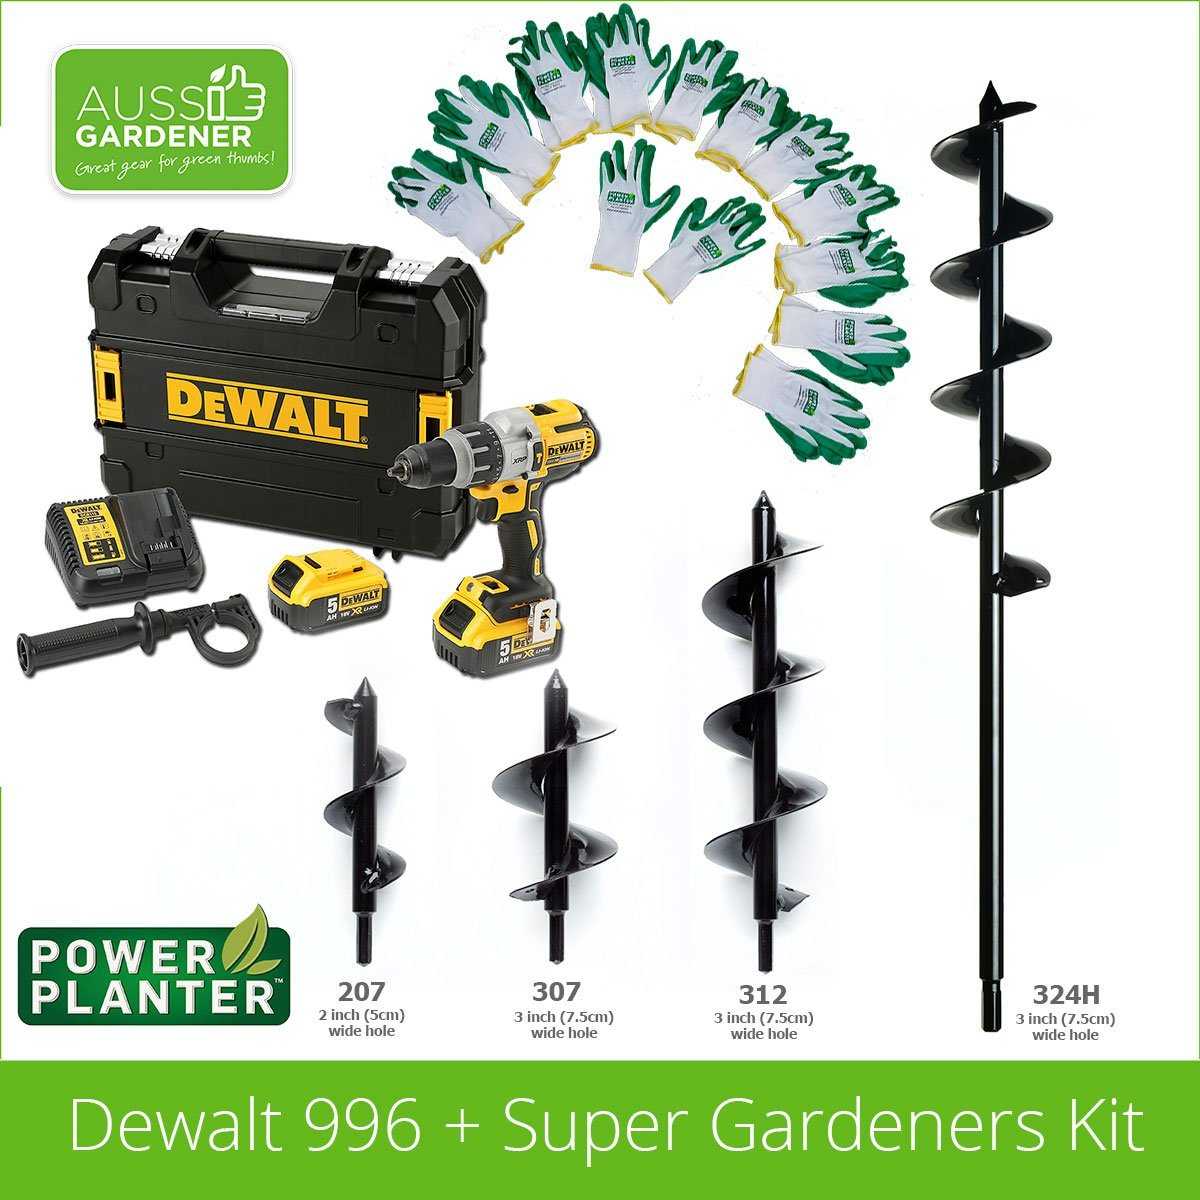 Power Planter Inc, The Dream Combination -  All 4 Power Planters + the Dewalt 996 drill complete kit.